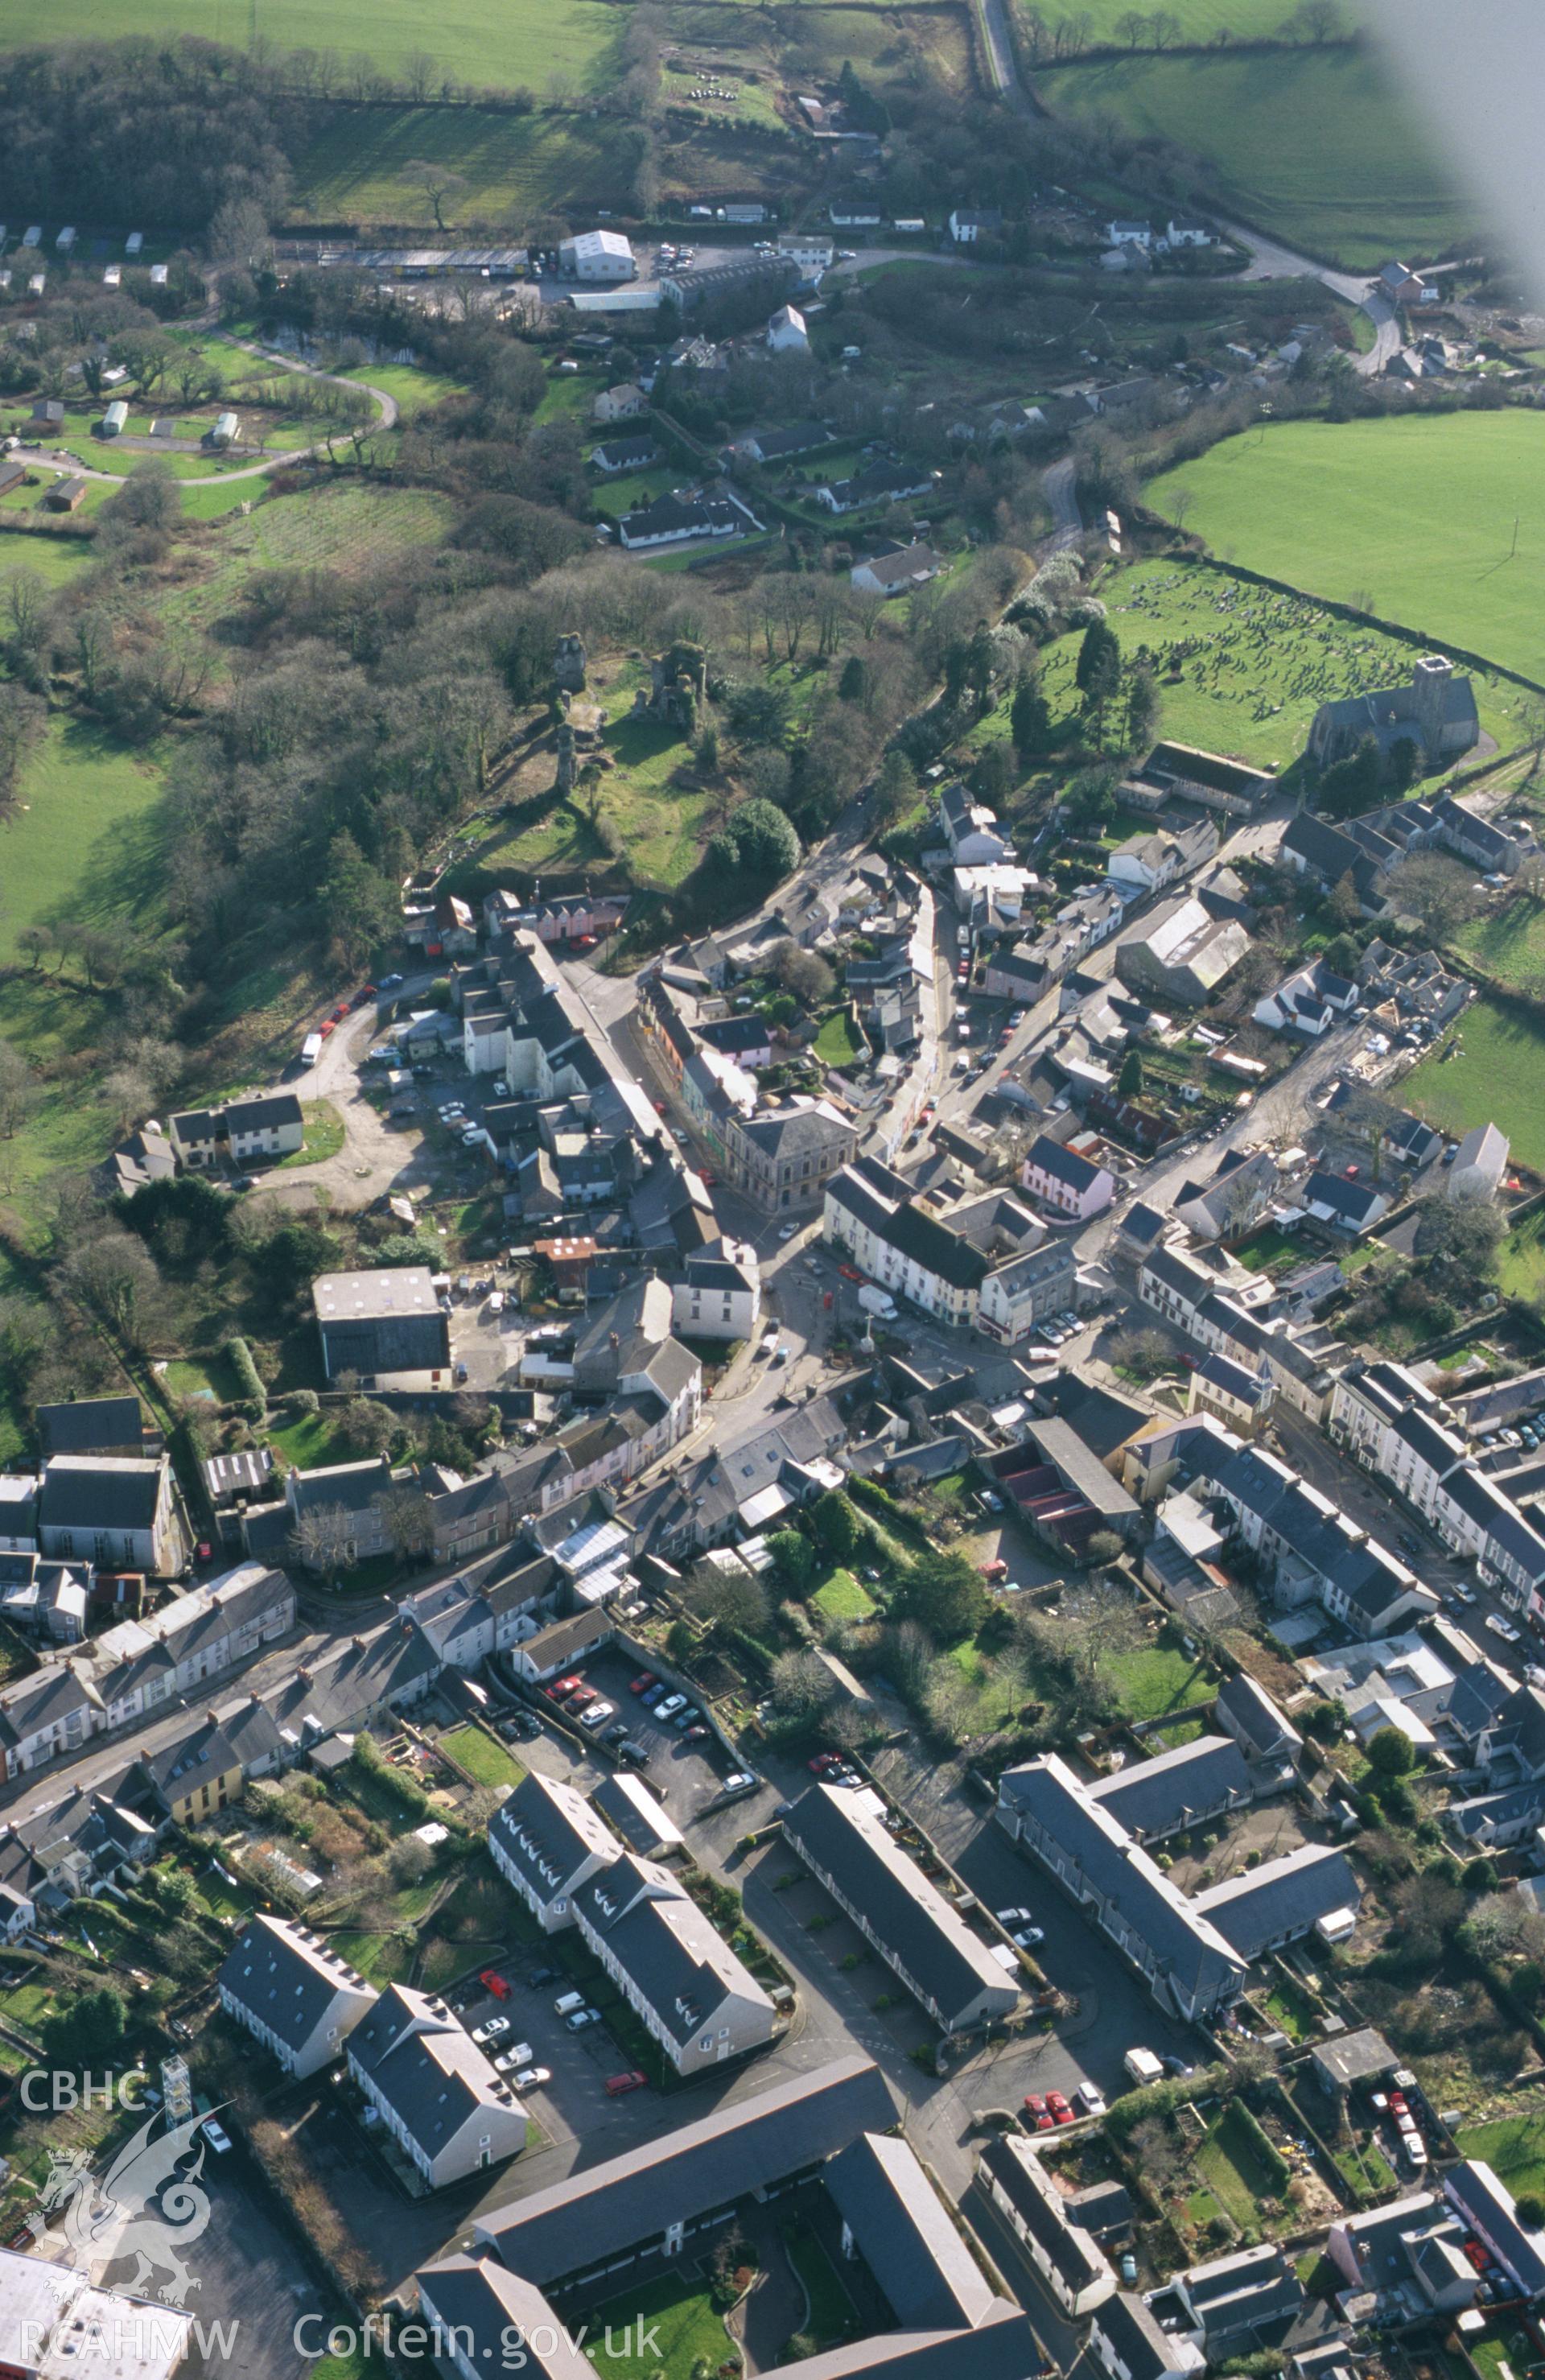 RCAHMW colour slide oblique aerial photograph of Narberth Castle, Narberth, taken by T.G.Driver on the 21/02/2000